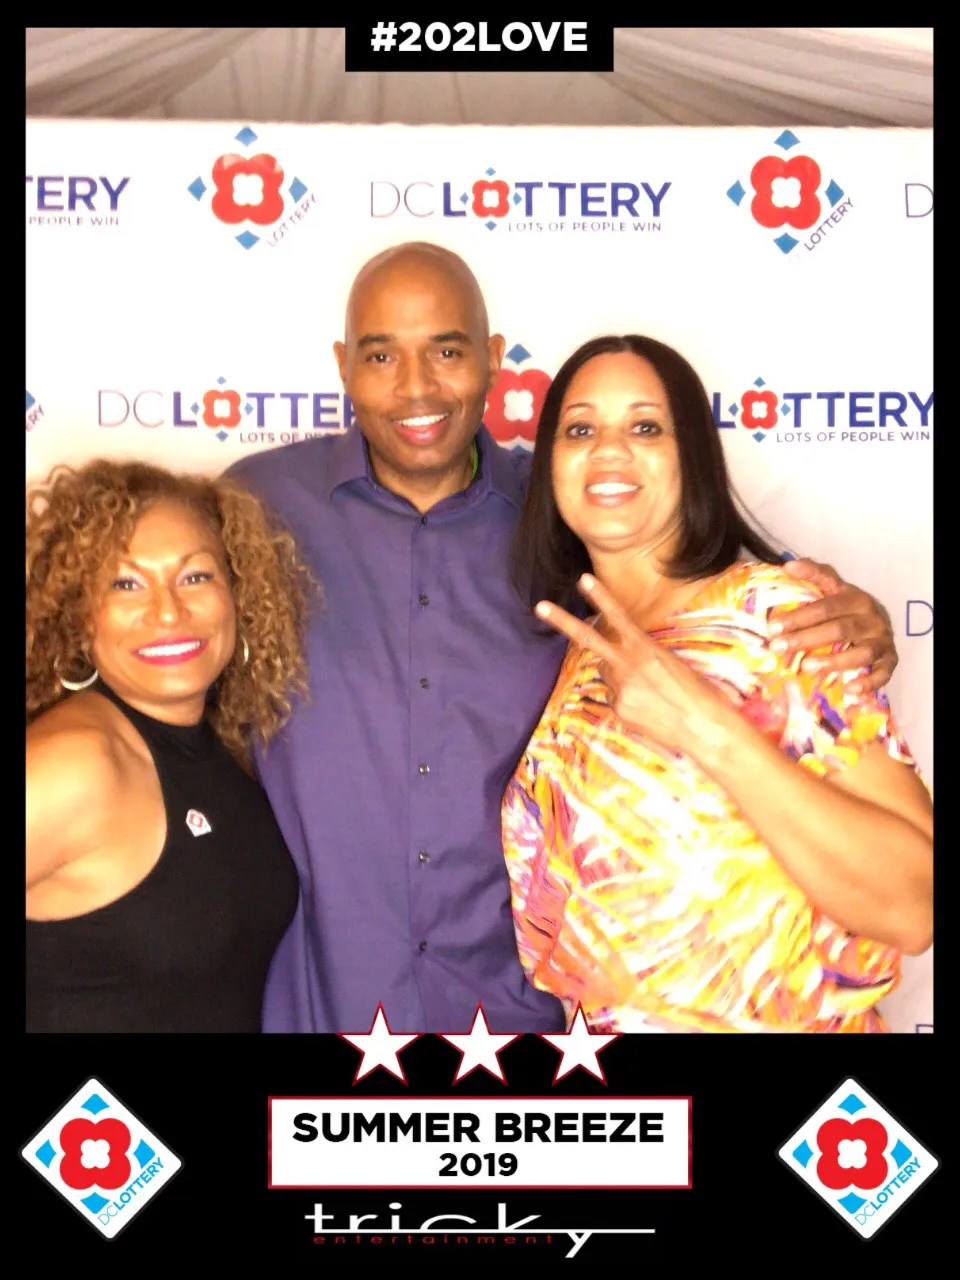 Three people posing for a photo in the DC Lottery photo booth